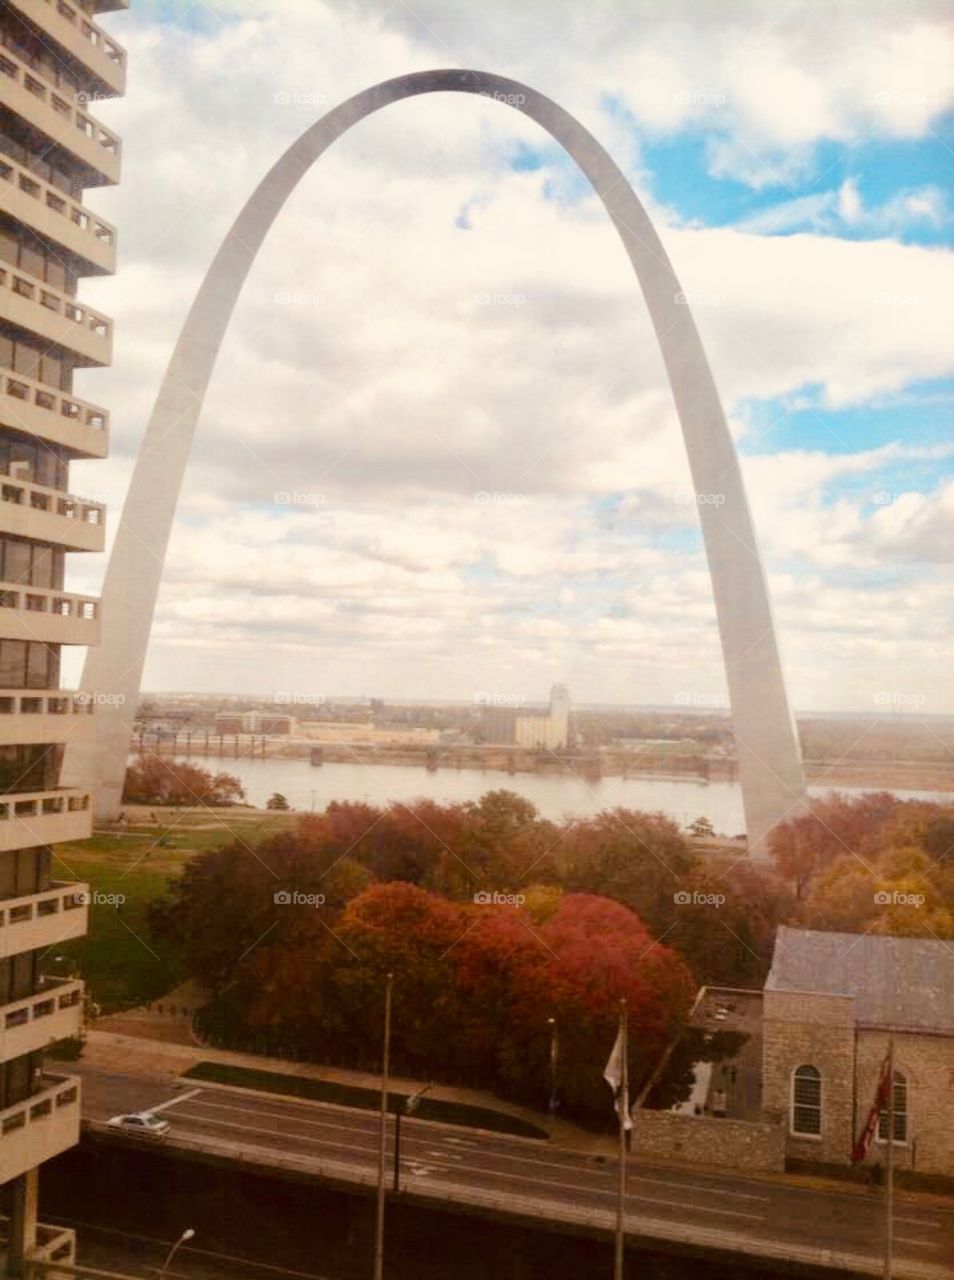 Gateway Arch, St. Louis, MO in the fall